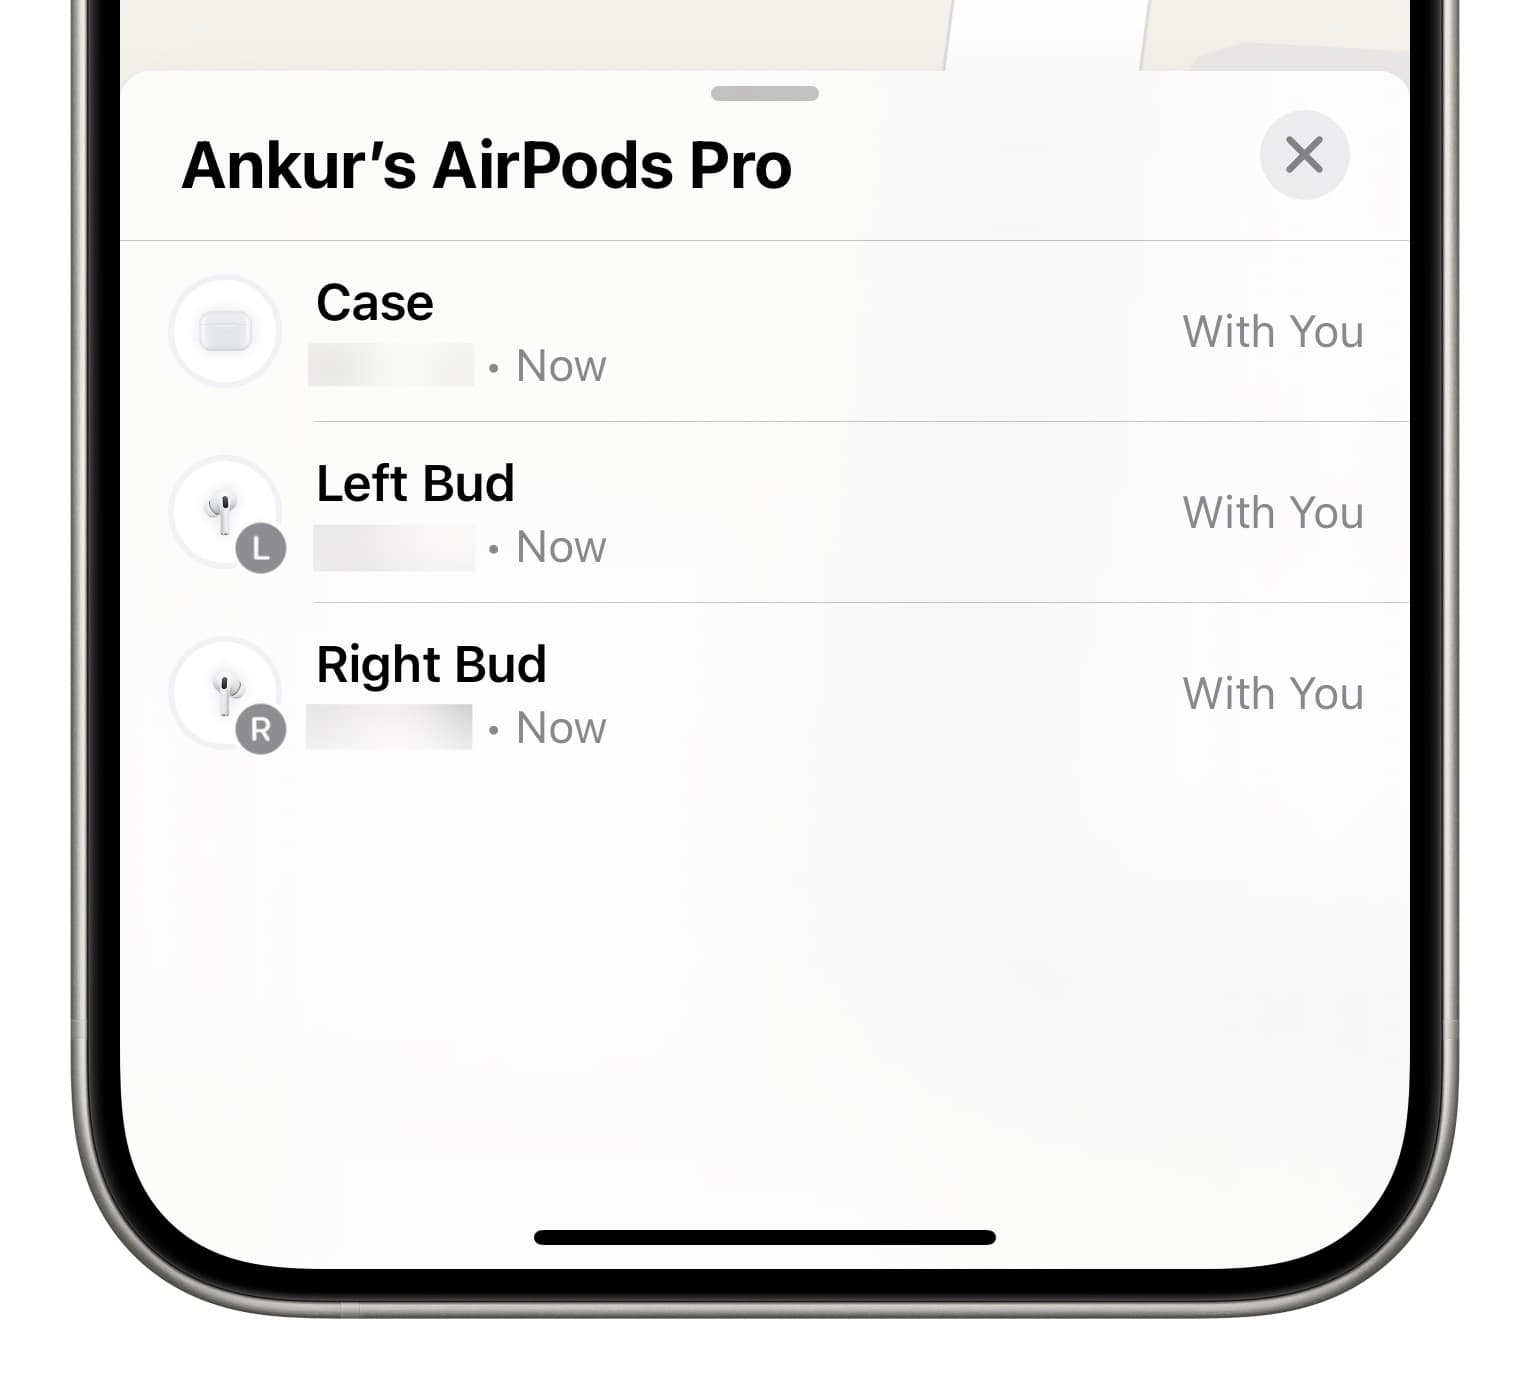 Select AirPods Pro 2nd generation case, left bud, or right bud to find one